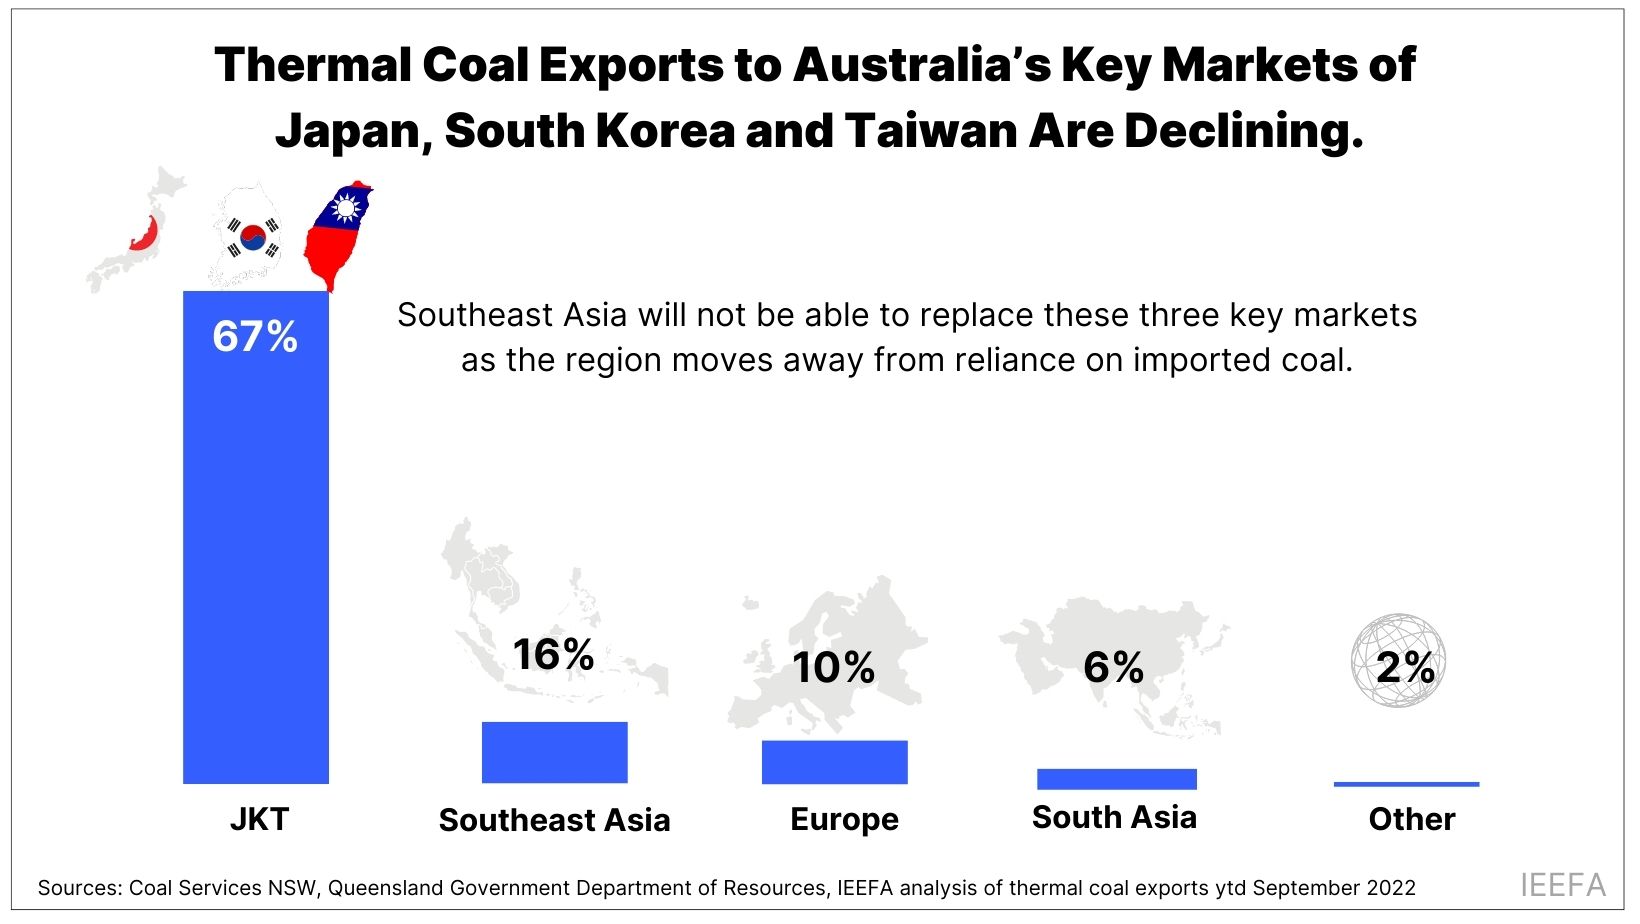 Thermal coal exports to Australia's Key Markets of Japan, South Korea and Taiwan are declining